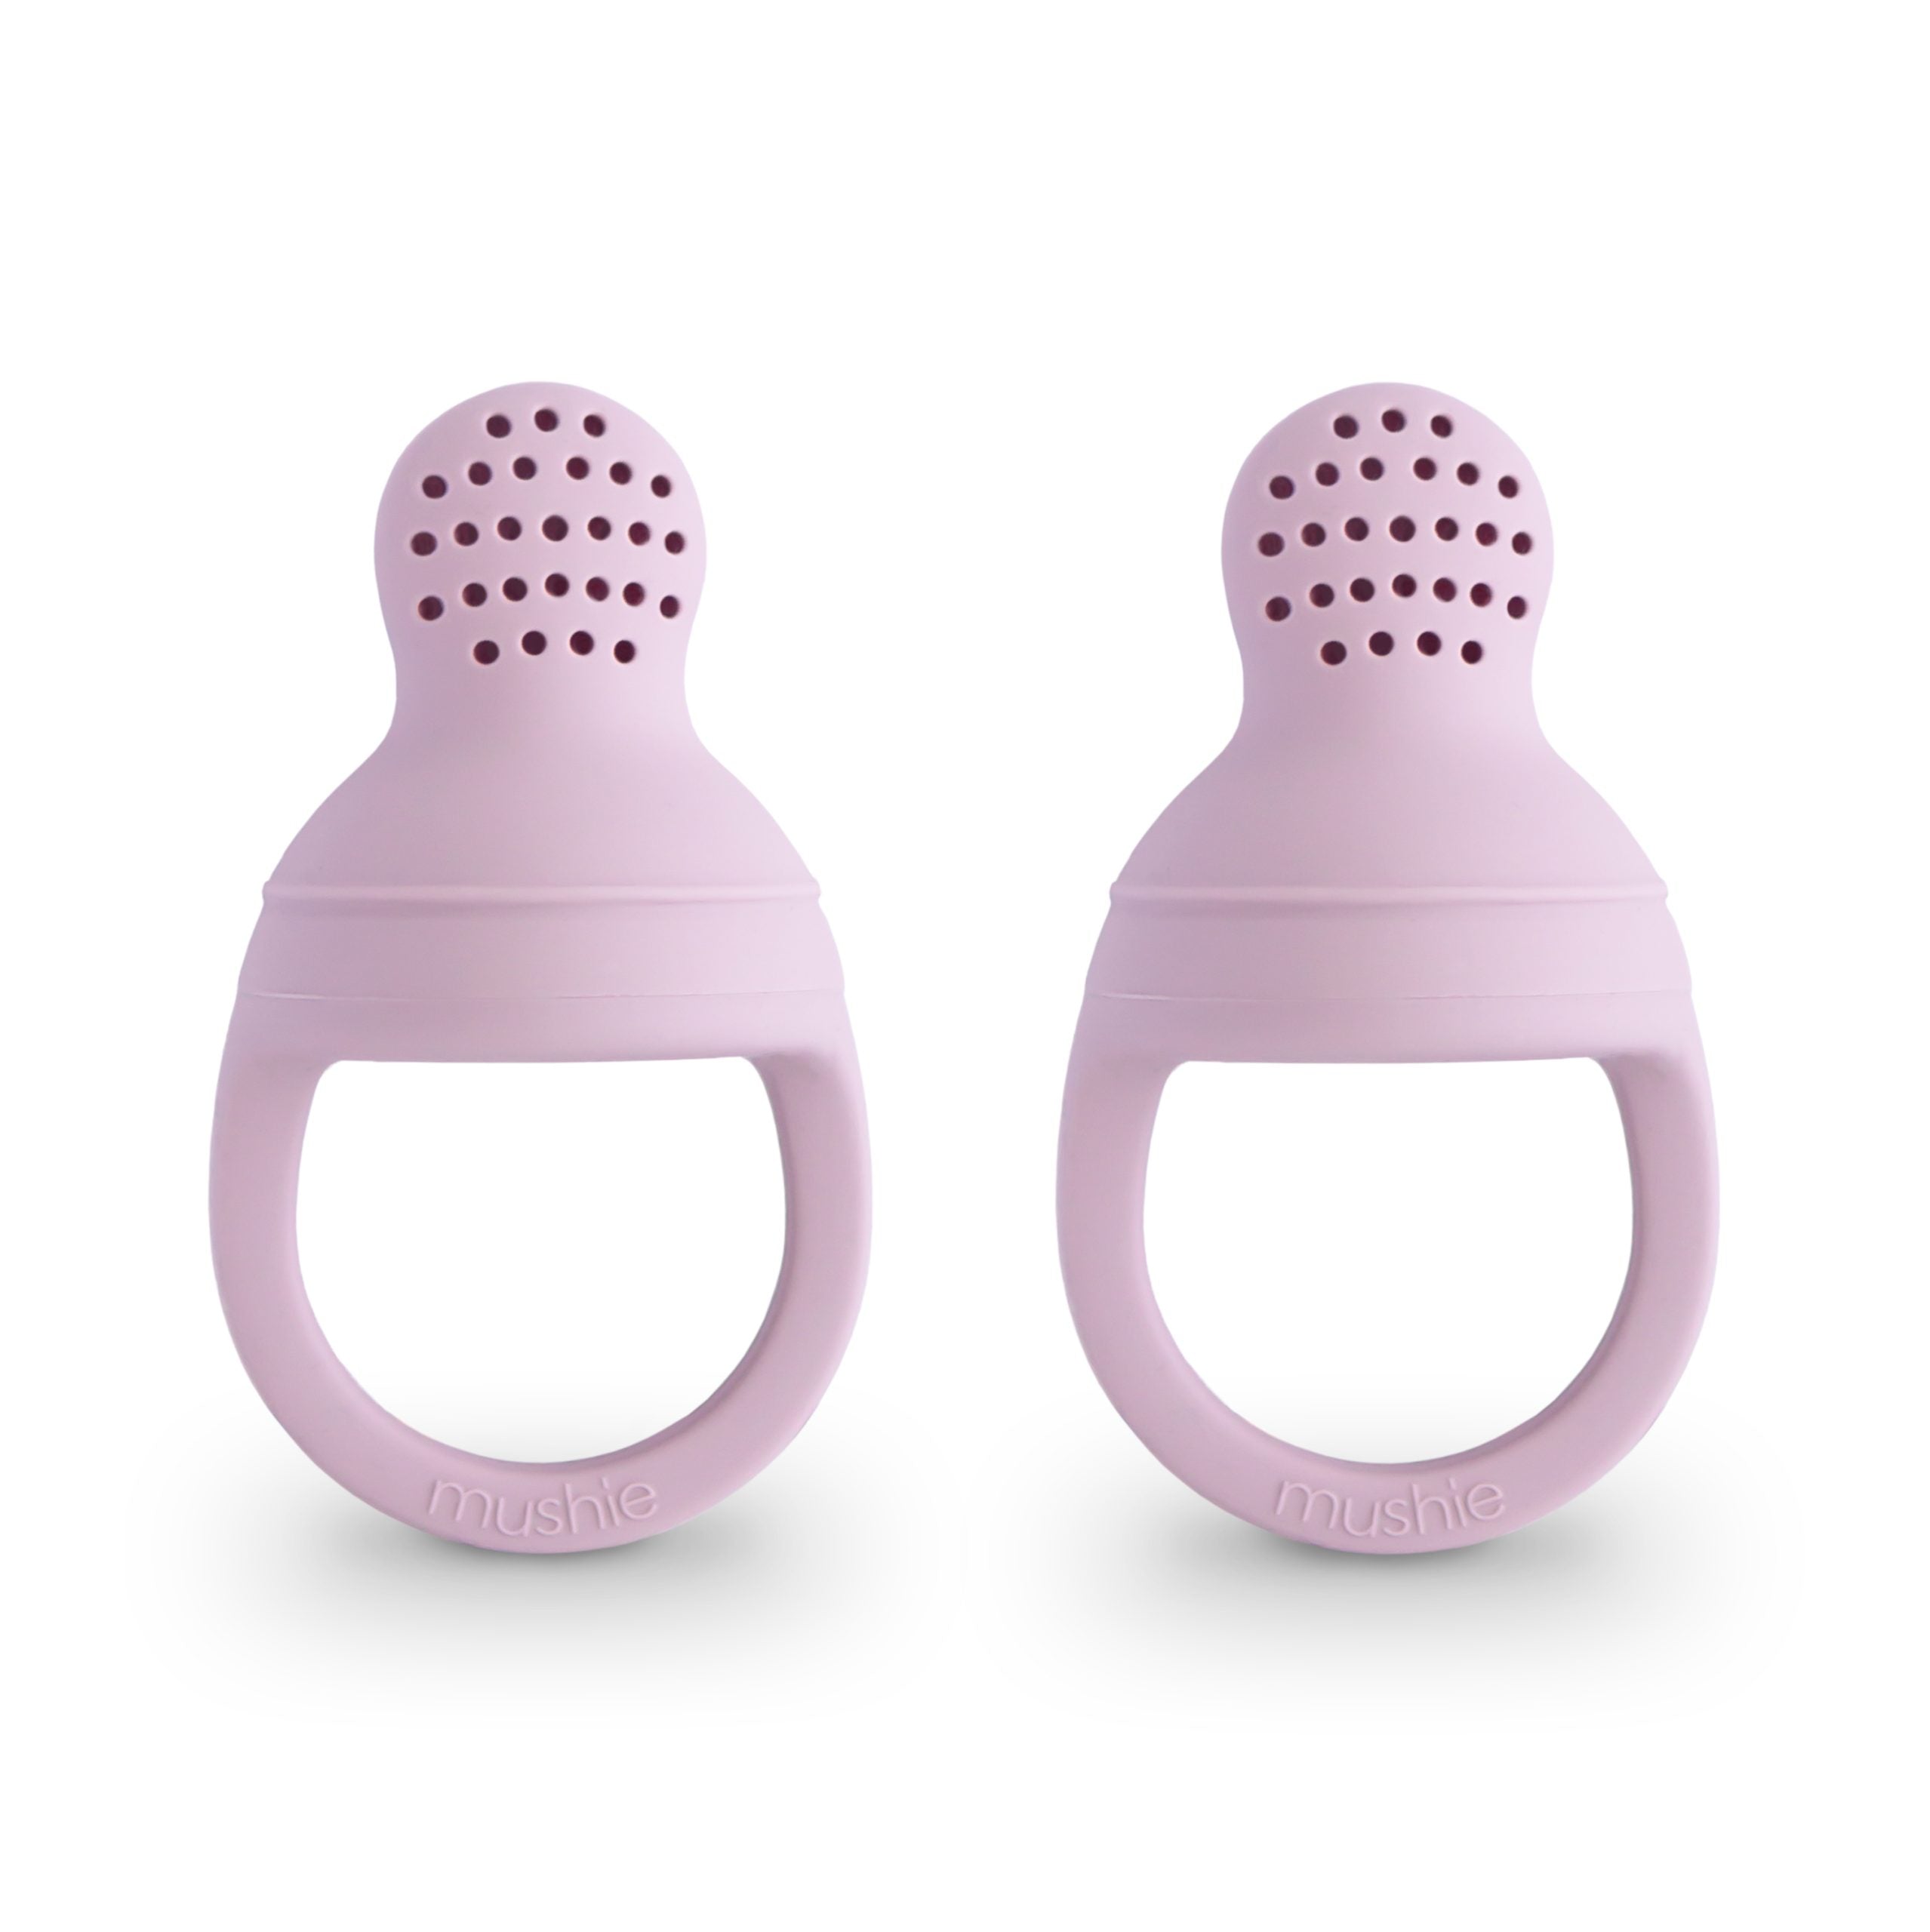 Tétine alimentaire en silicone Mushie - Lilas